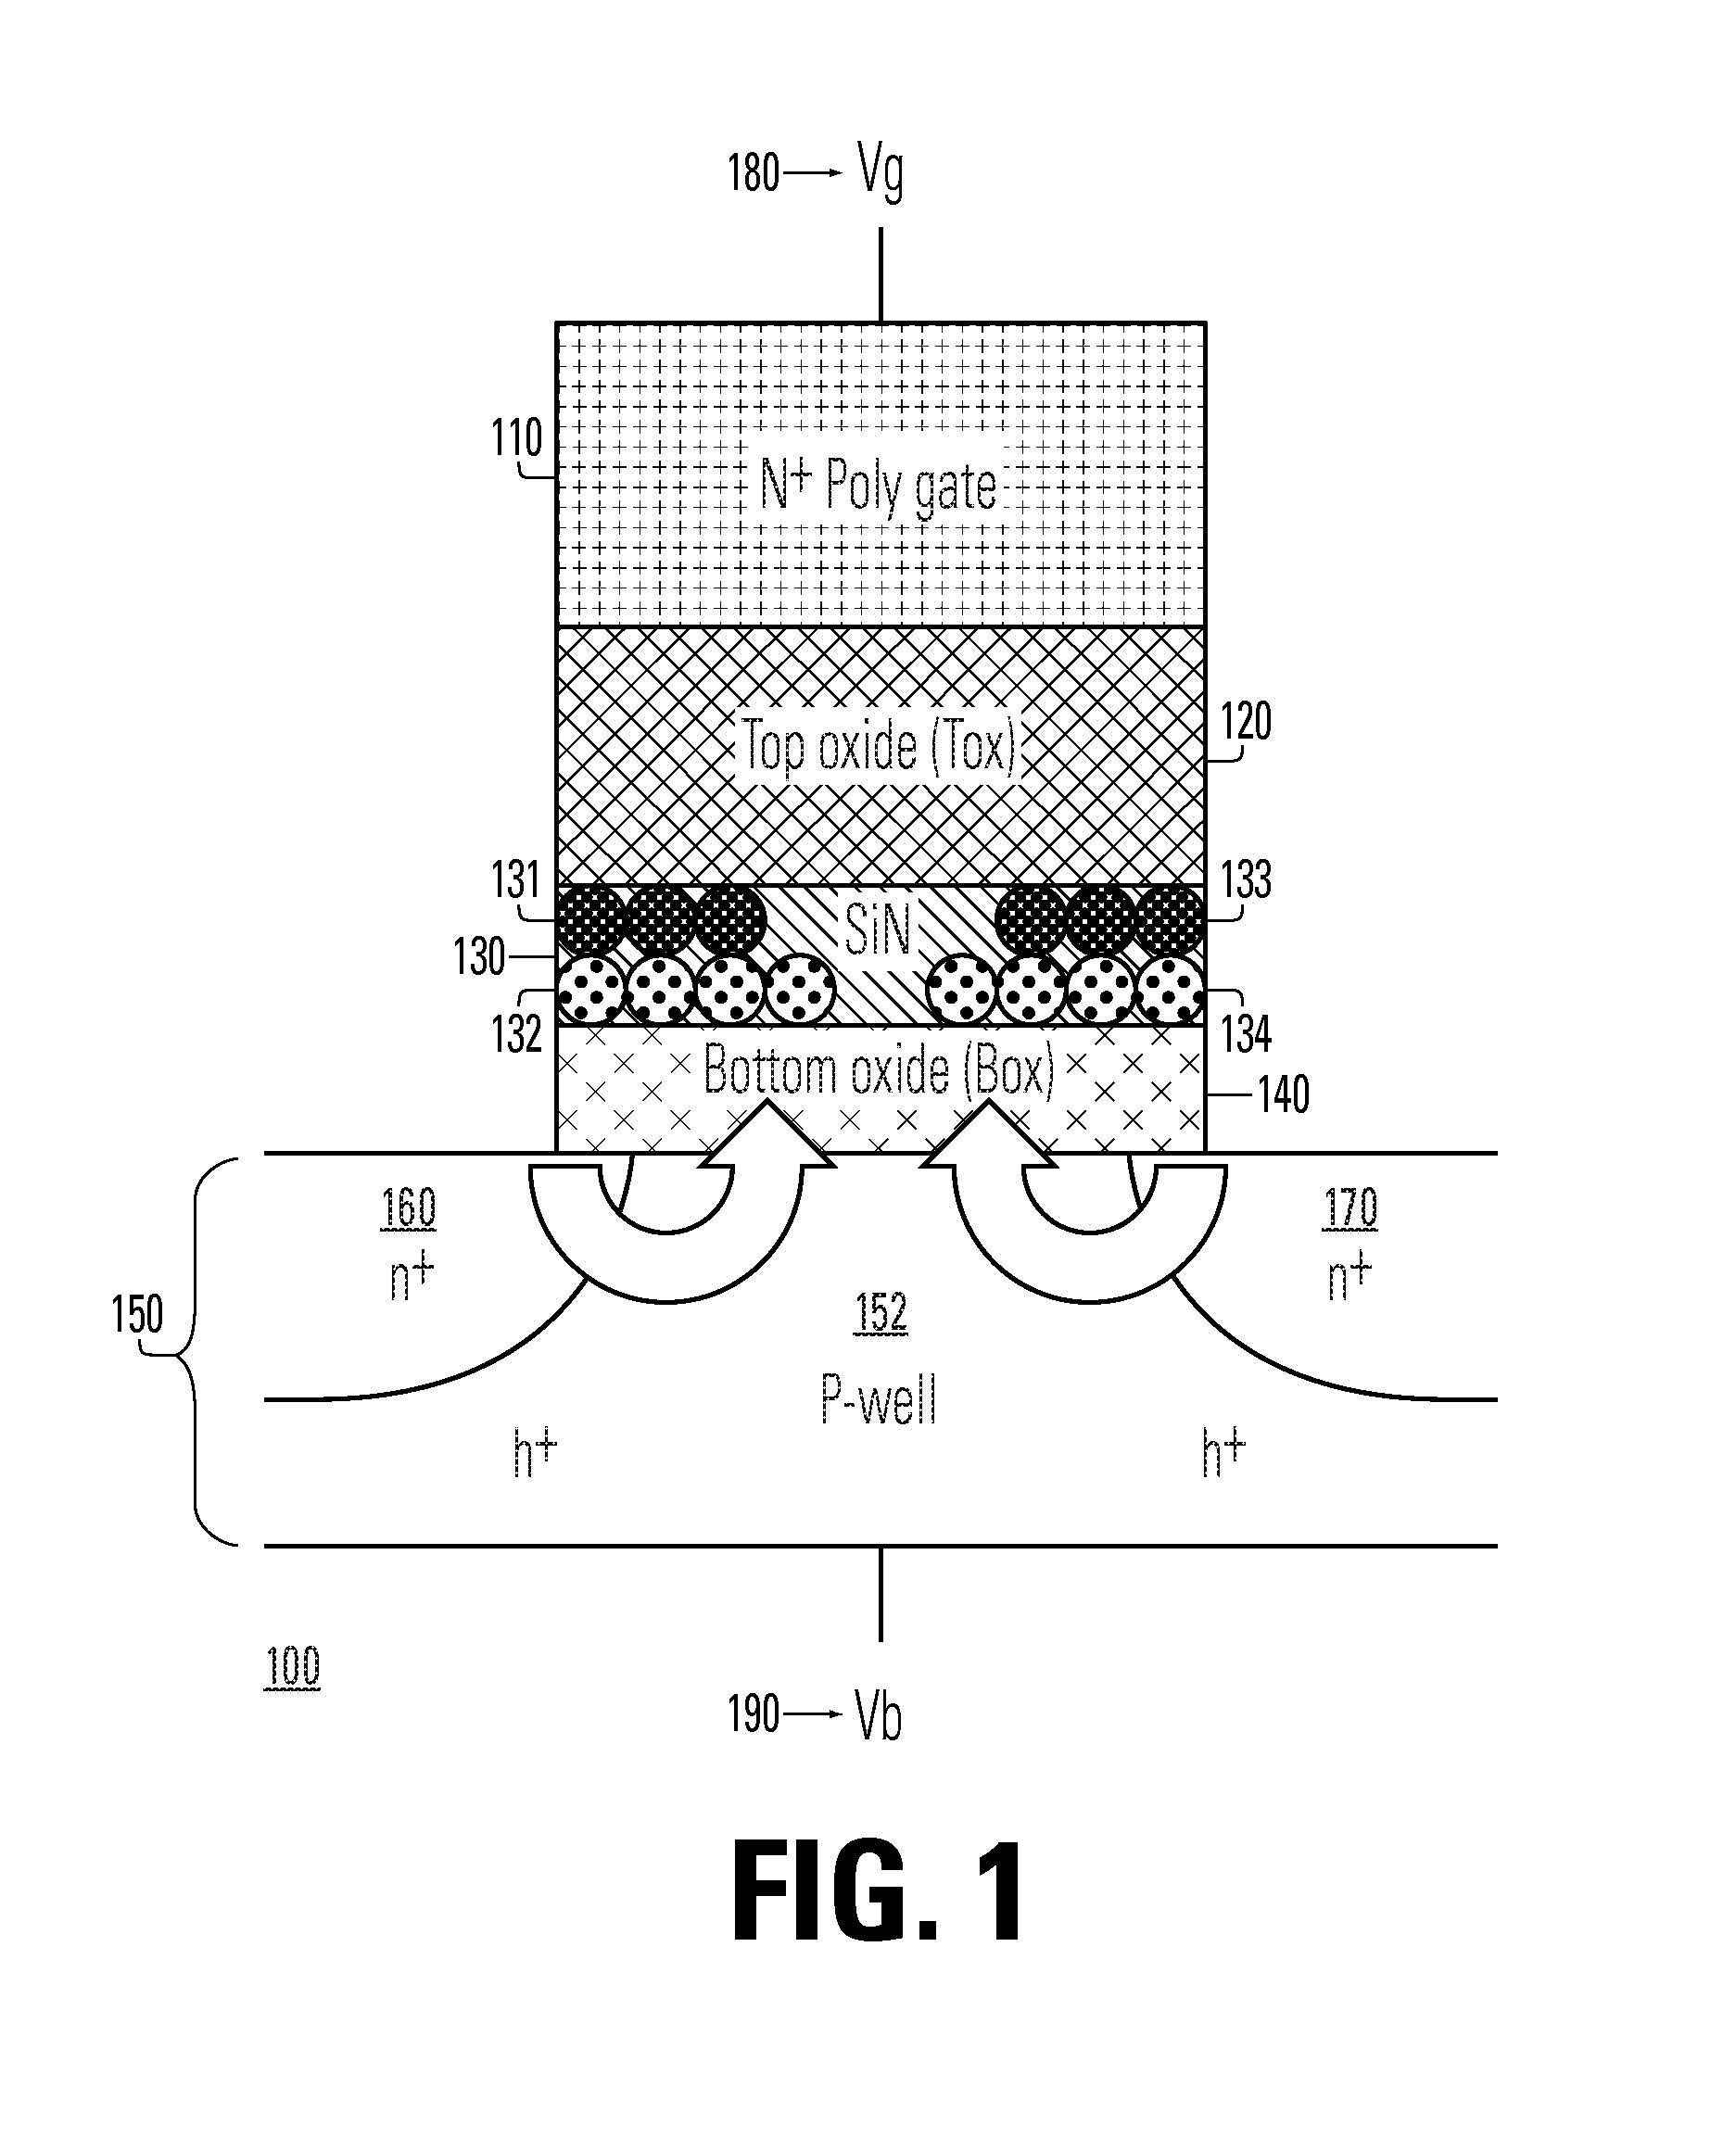 Methods to resolve hard-to-erase condition in charge trapping non-volatile memory